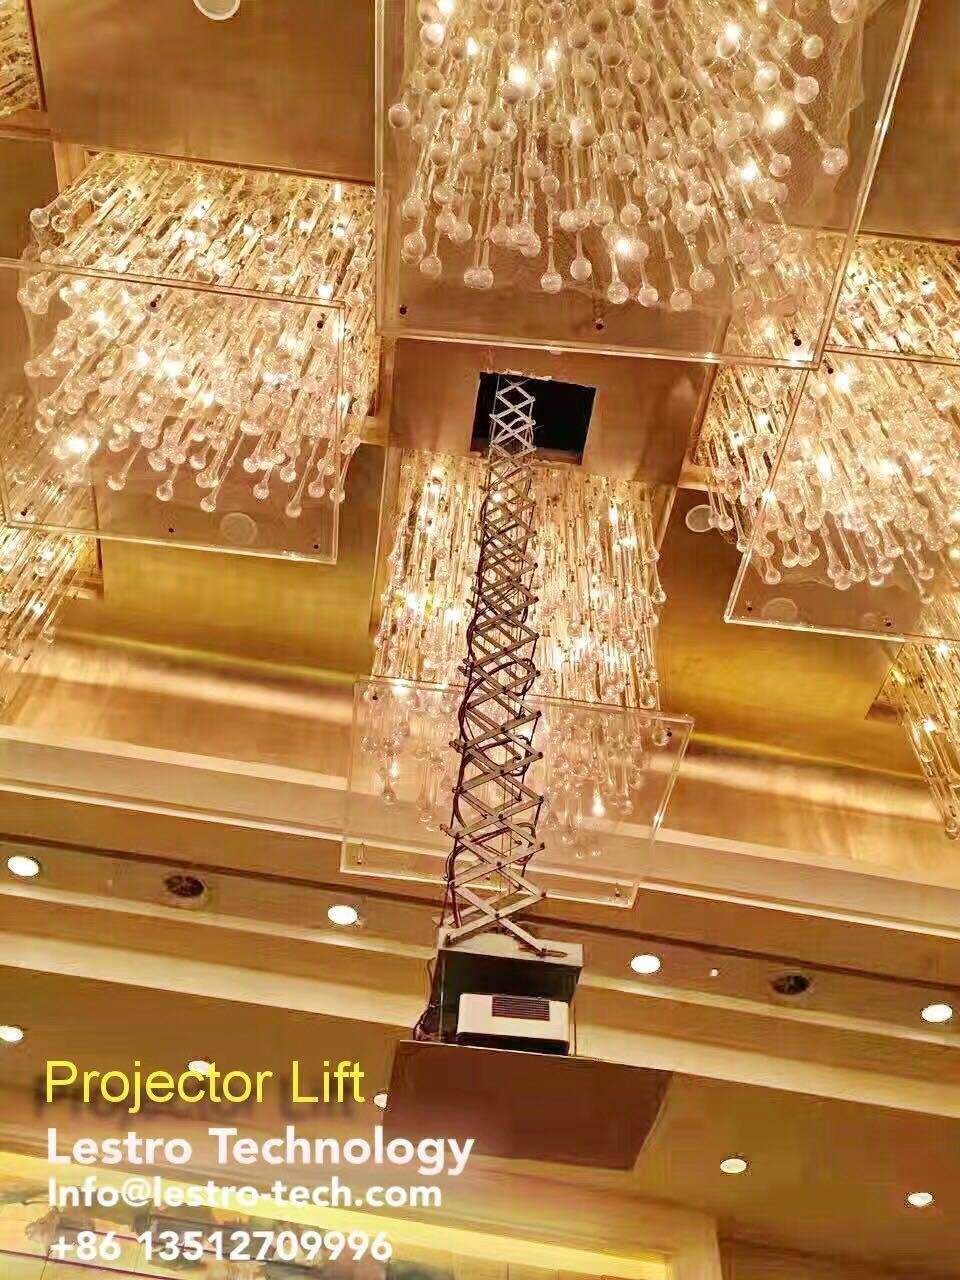 Motorized Projector Lift –B5 Series Load up to 220Ibs, 1.5M to 10M Travel 5